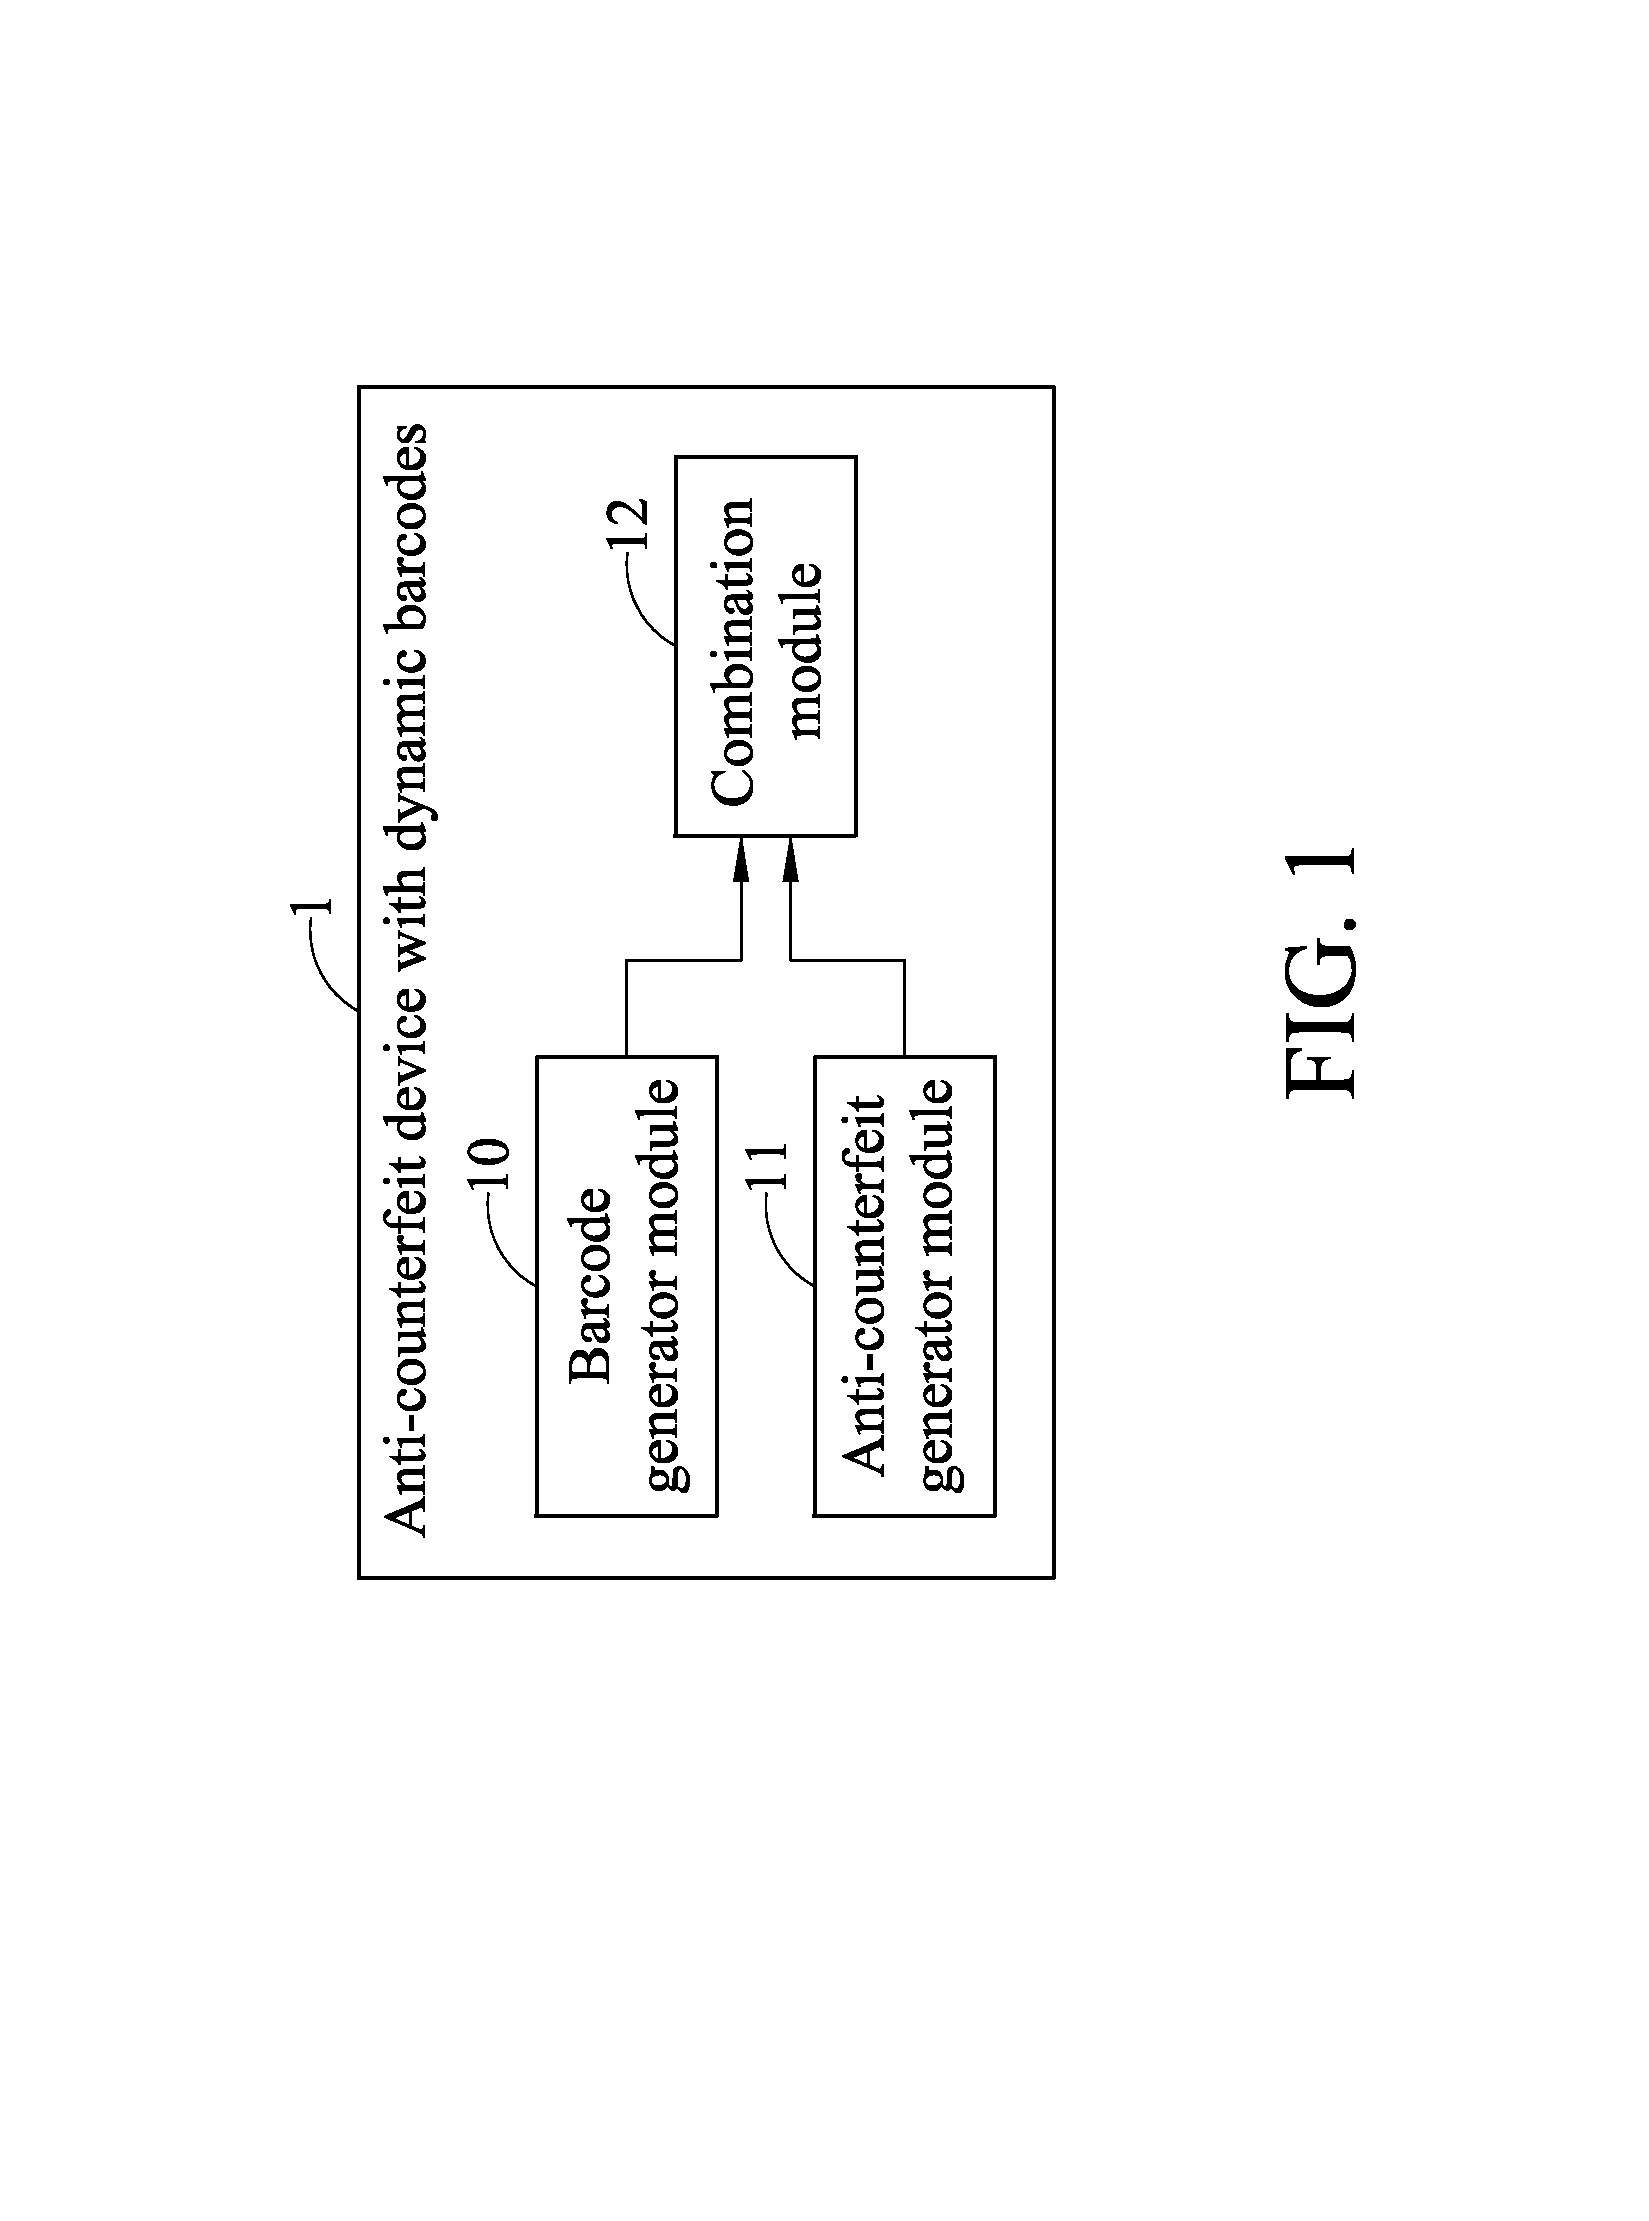 Anti-counterfeit device with dynamic barcode, system and method for Anti-counterfeit with dynamic barcode